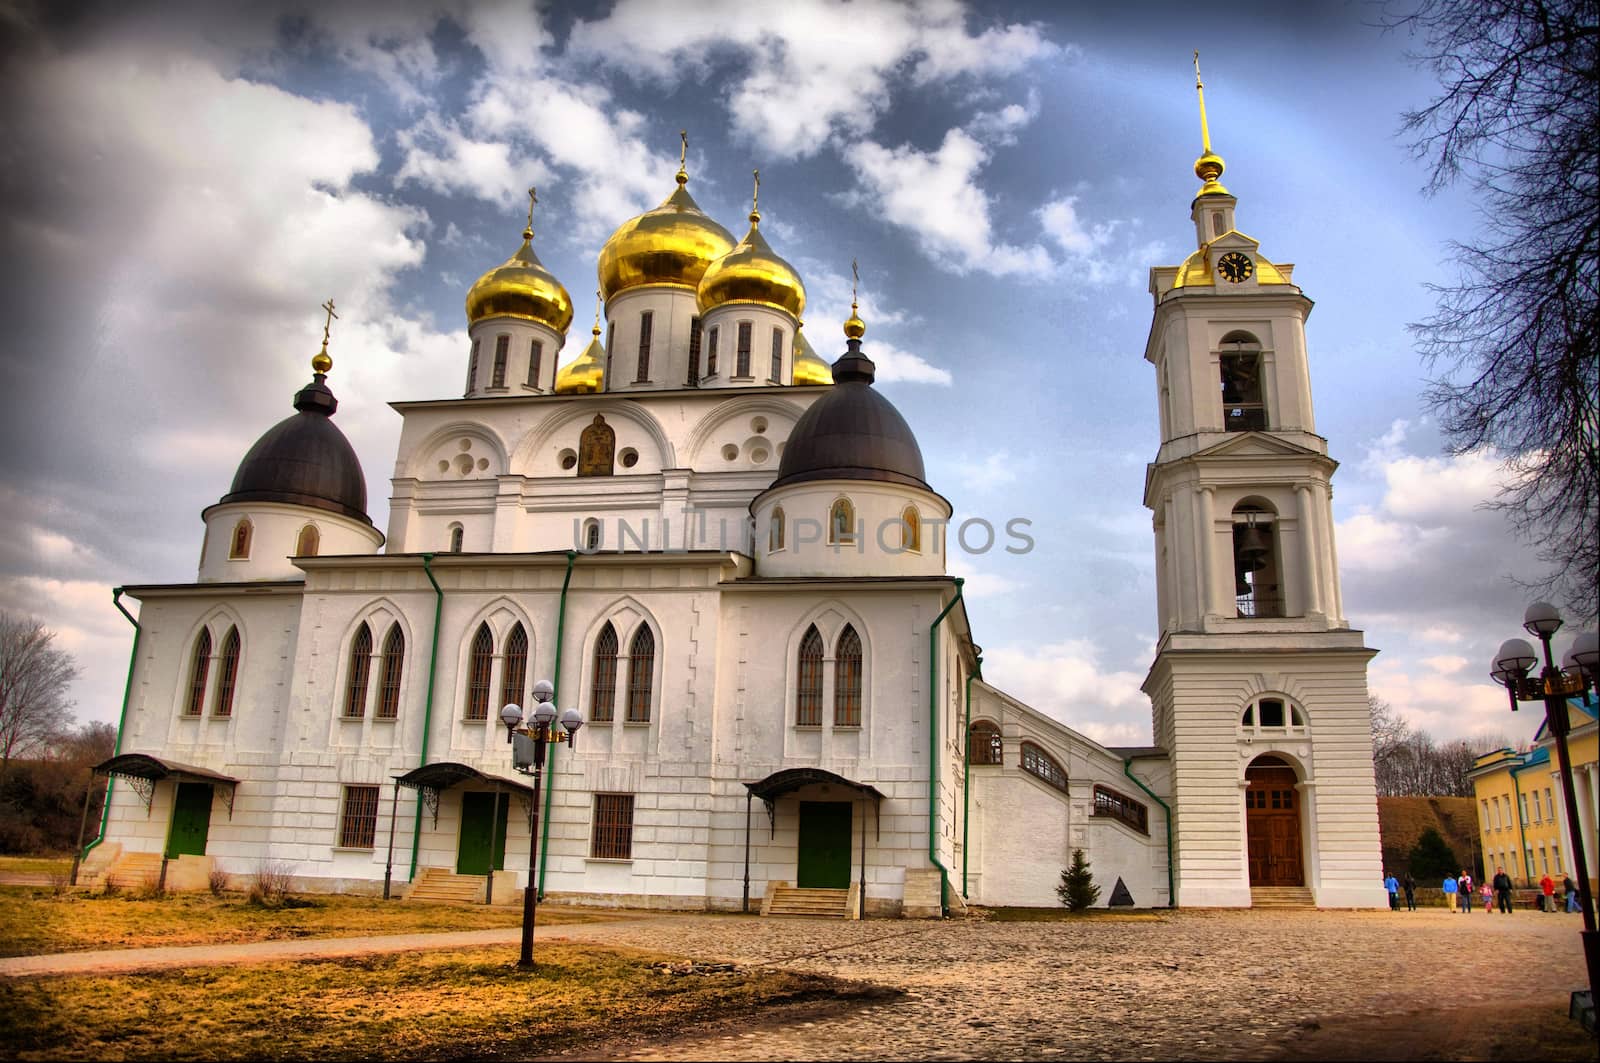 Uspensky Cathedral (sobor) with golden domes, Dmitrov, Moscow region, Russia